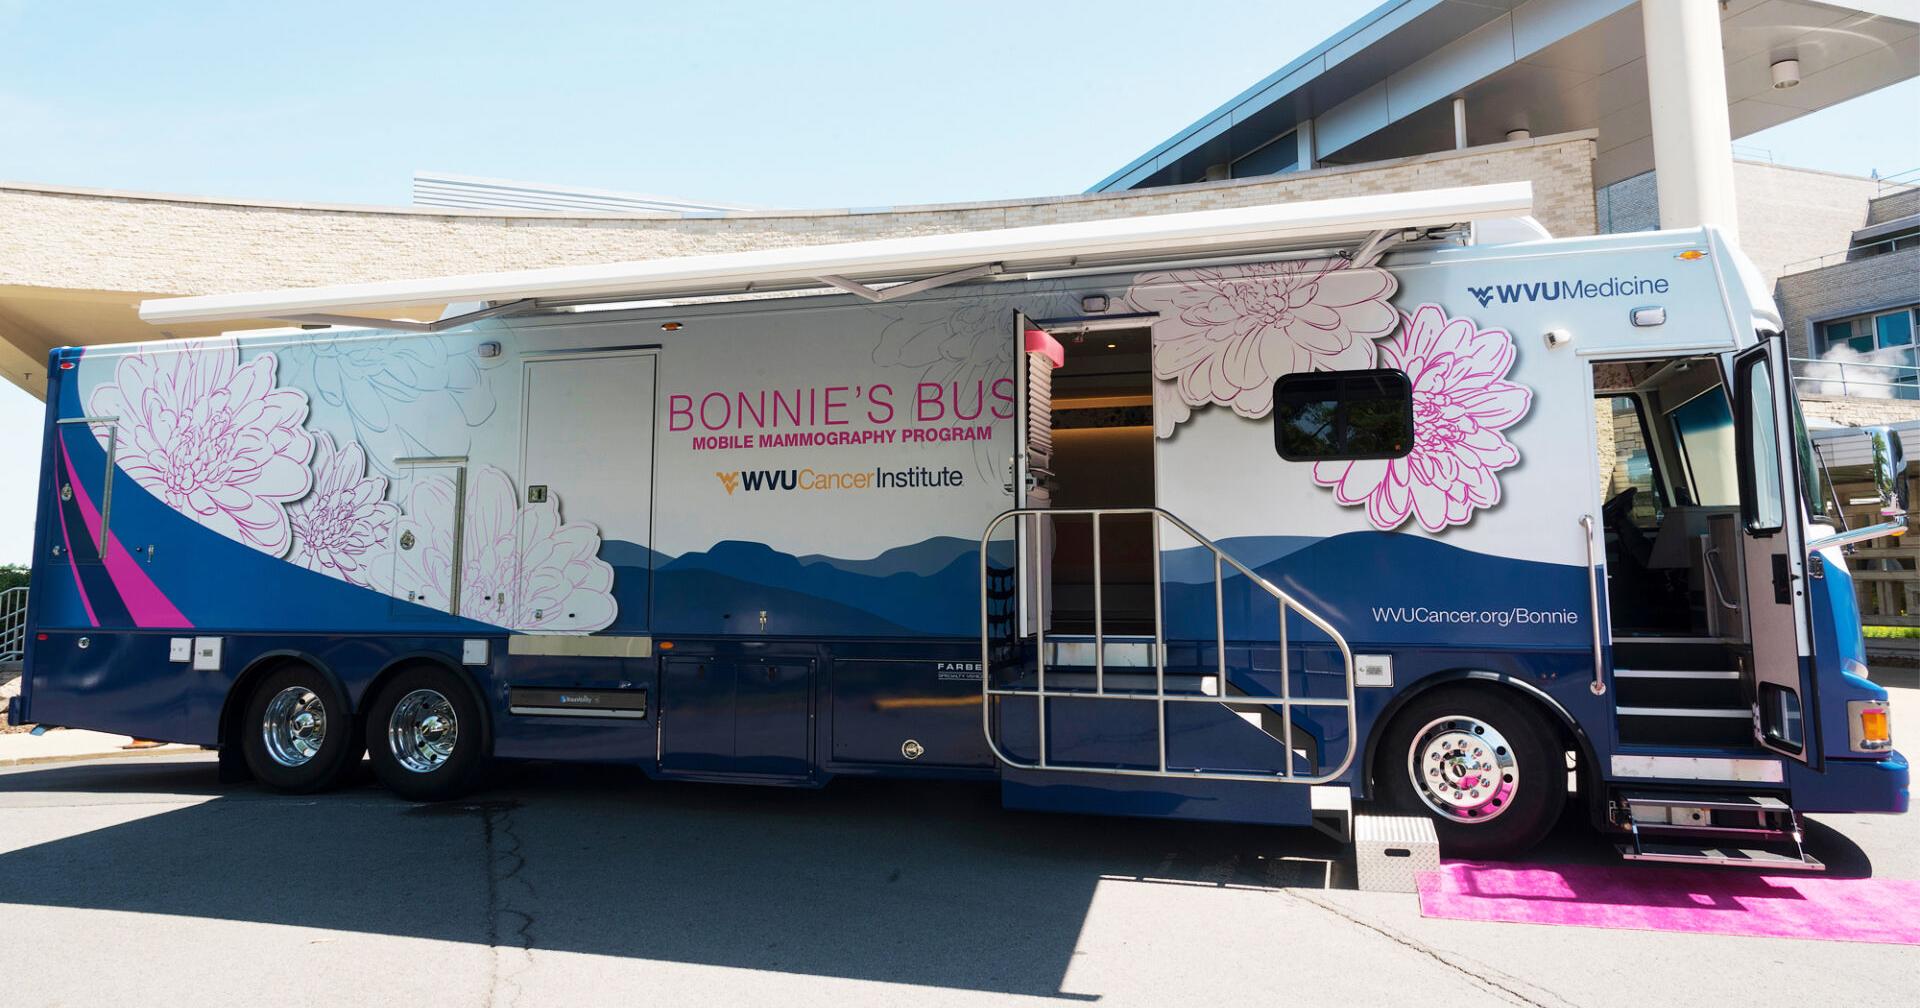 Bonnie’s Bus to offer mammograms in Chester, West Milford, and Newburg